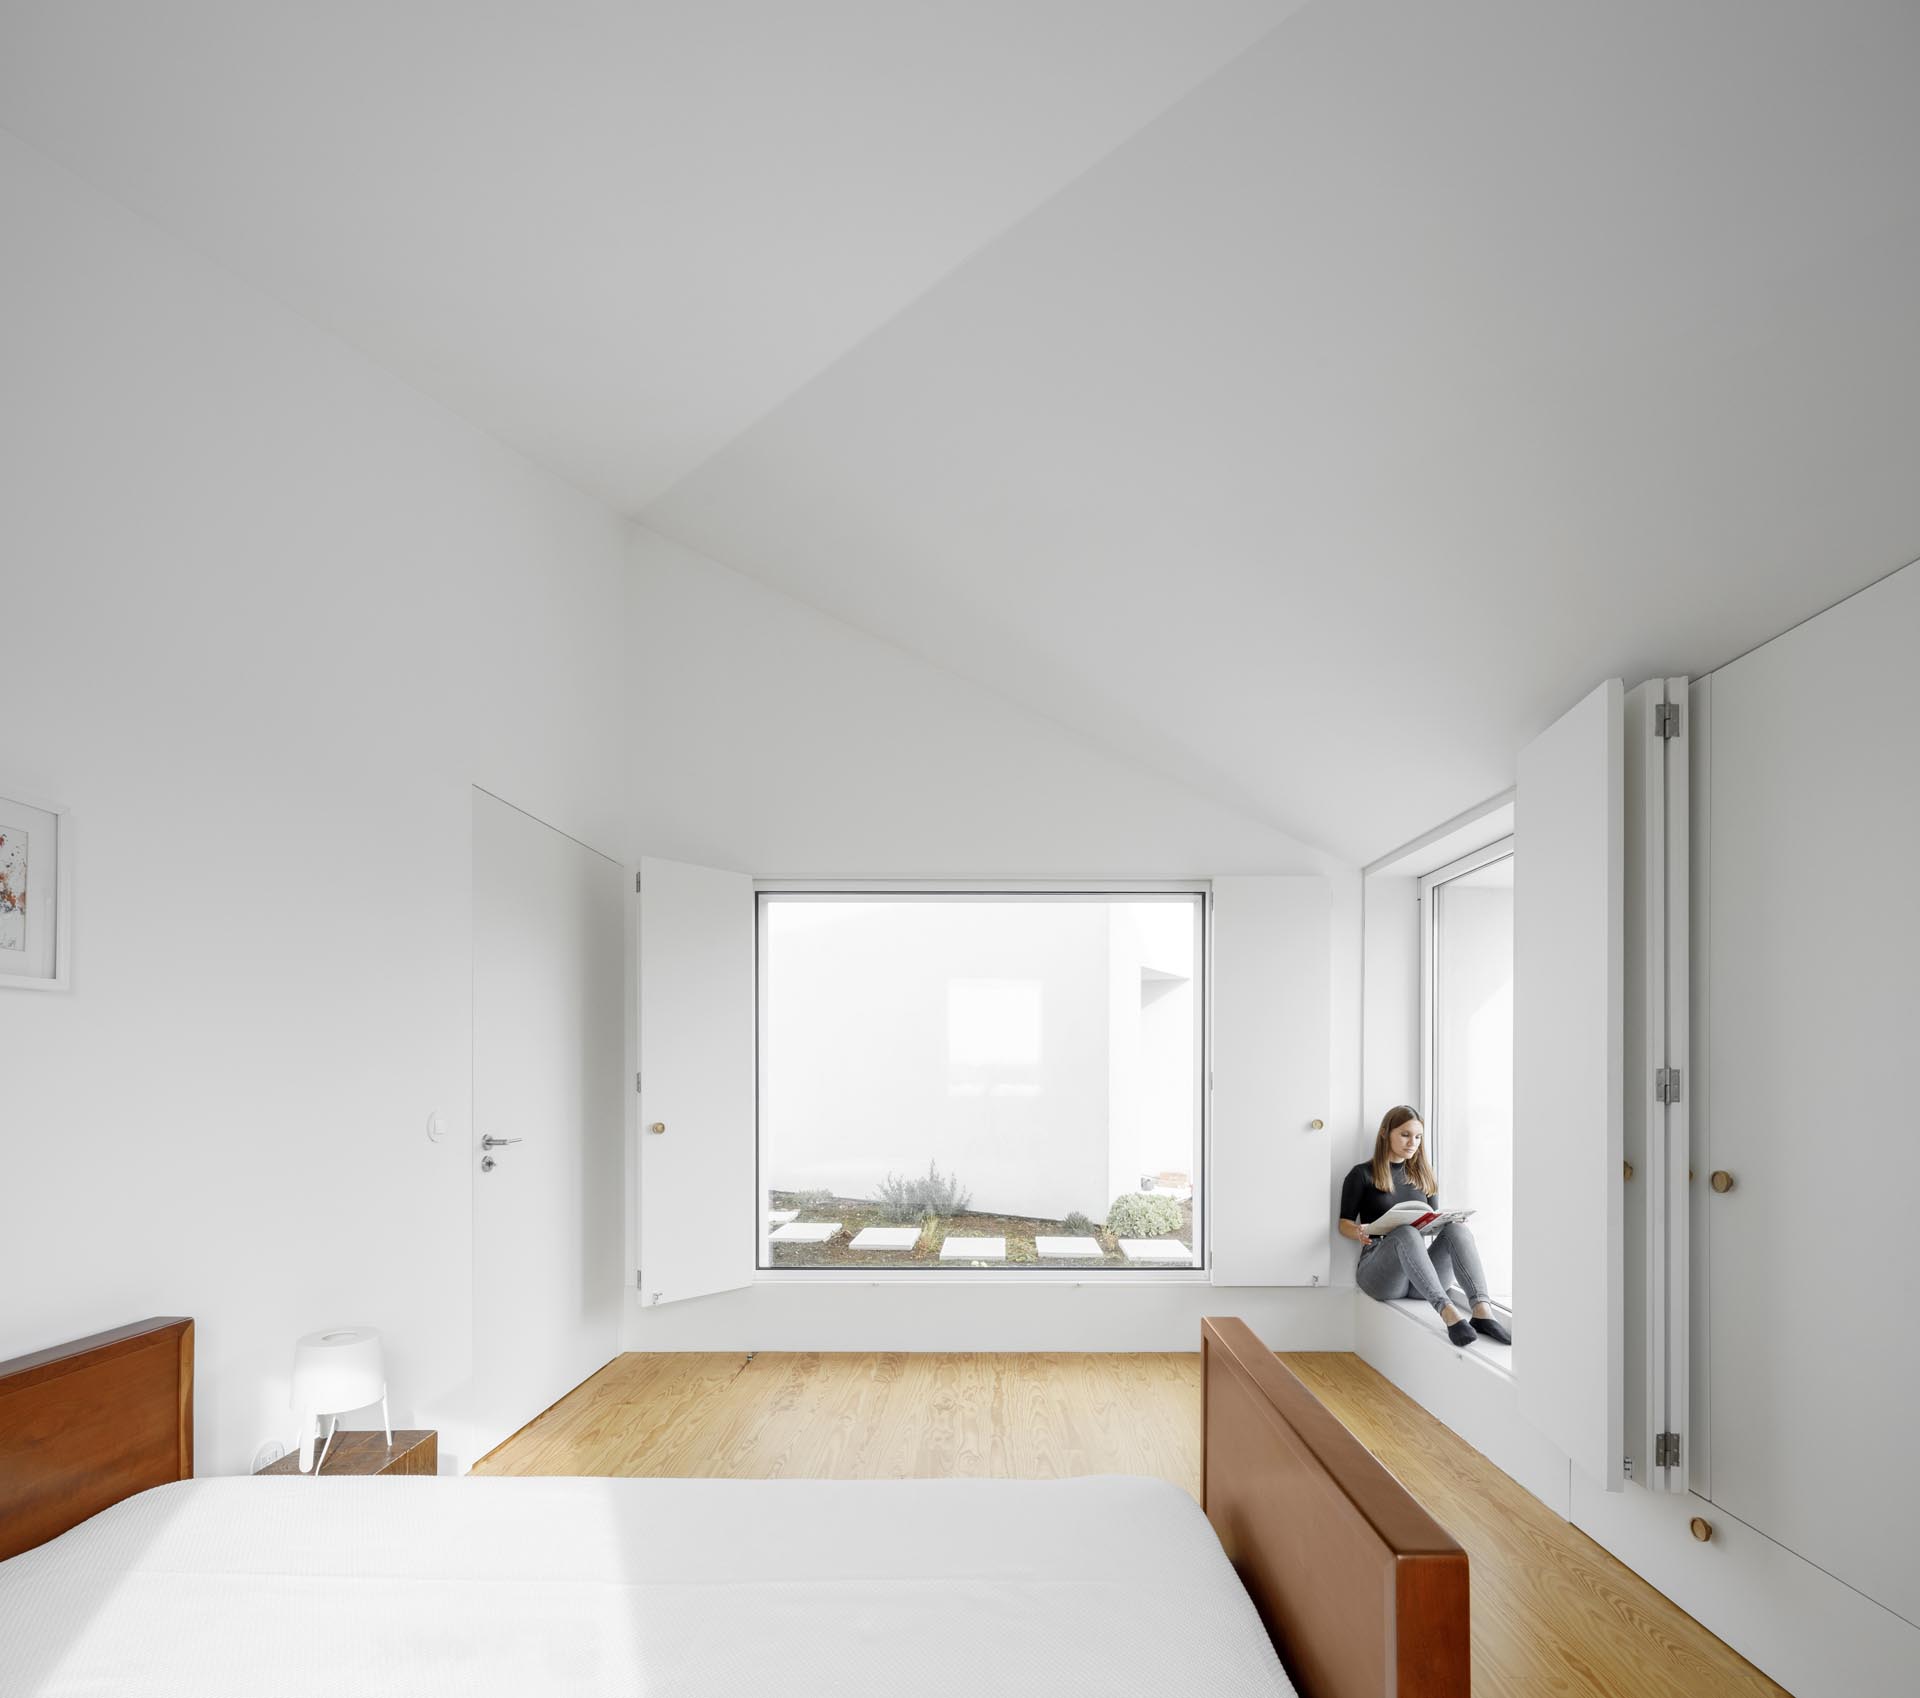 A modern bedroom with minimalist furnishings and folding window shutters.